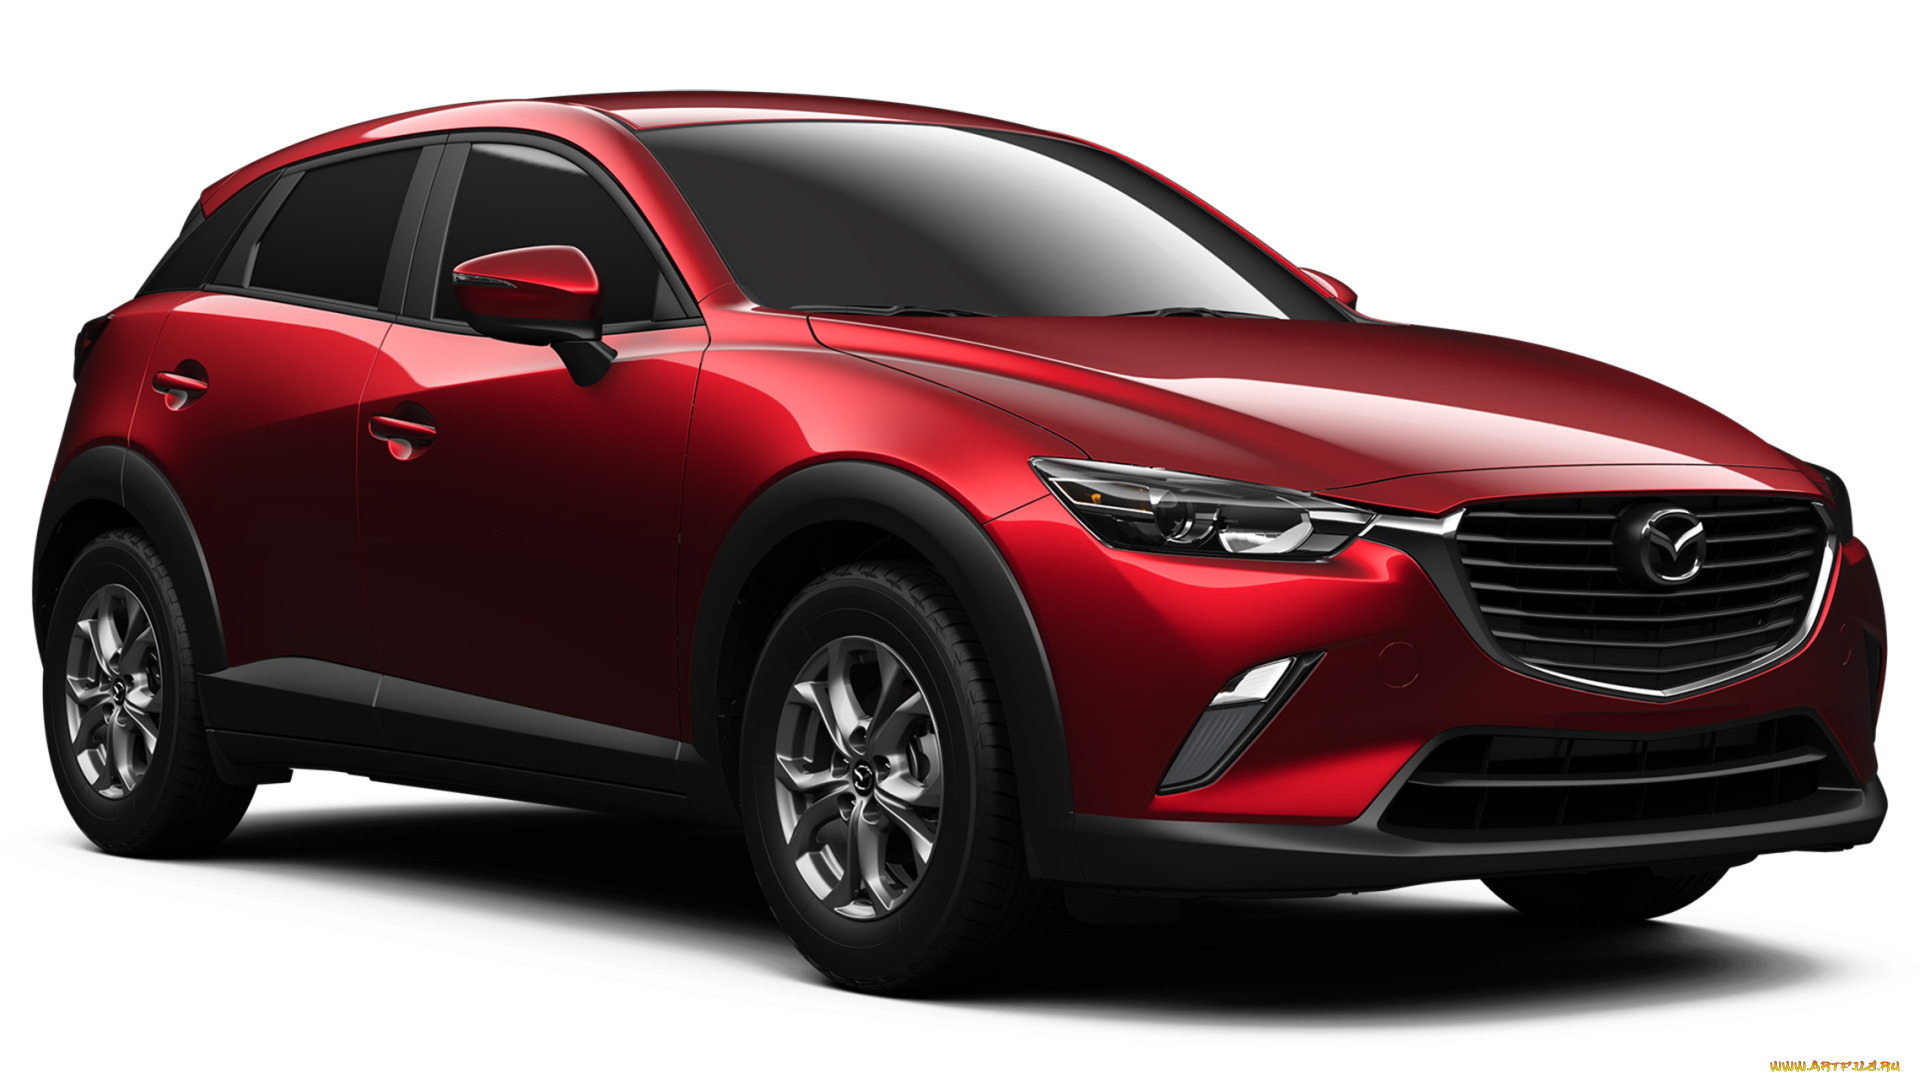 mazda, cx-3, review, subcompact, crossover, 2018, автомобили, 3д, 2018, crossover, subcompact, cx-3, mazda, red, review